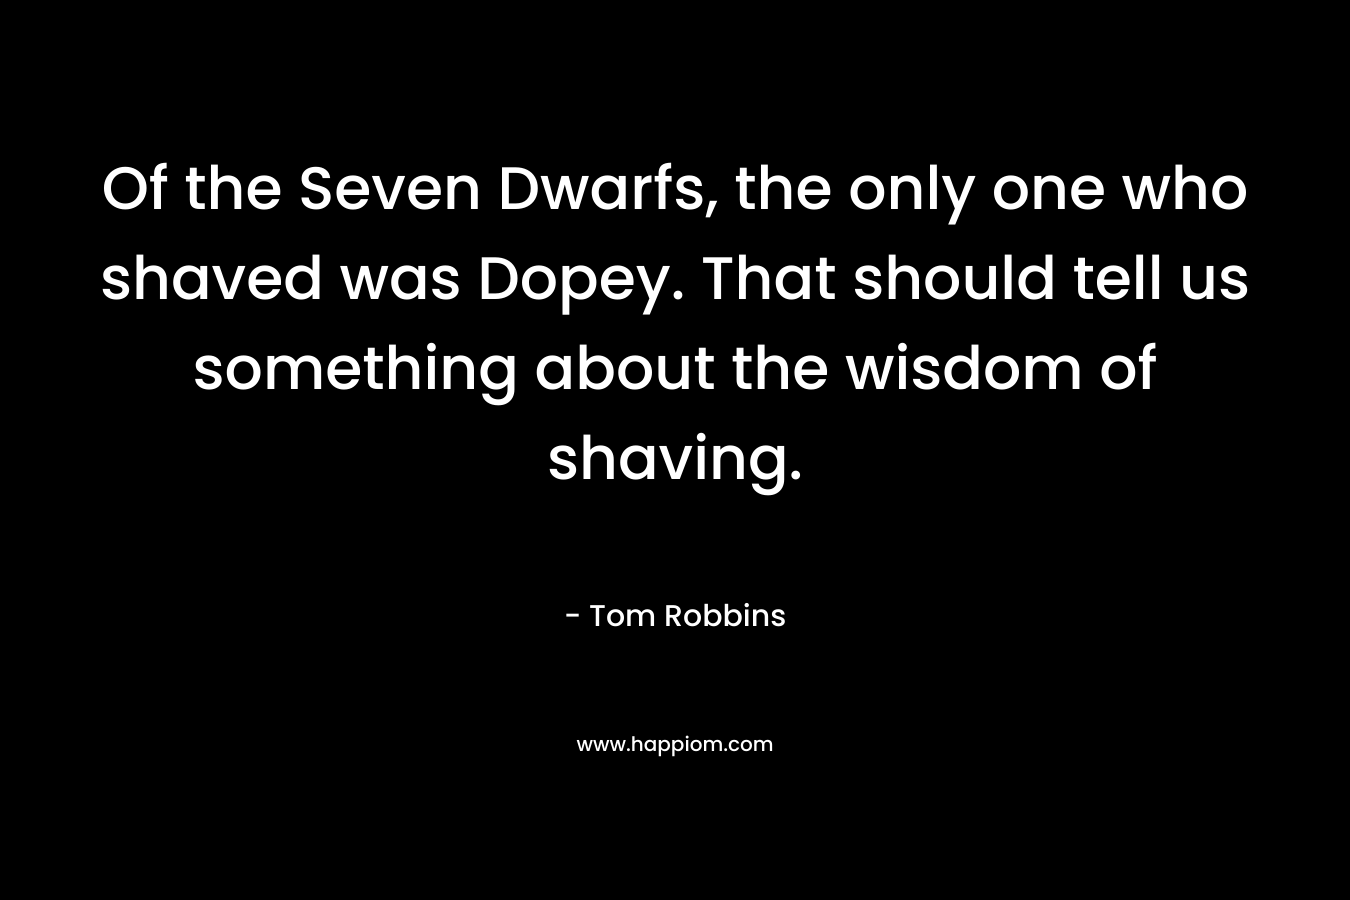 Of the Seven Dwarfs, the only one who shaved was Dopey. That should tell us something about the wisdom of shaving.